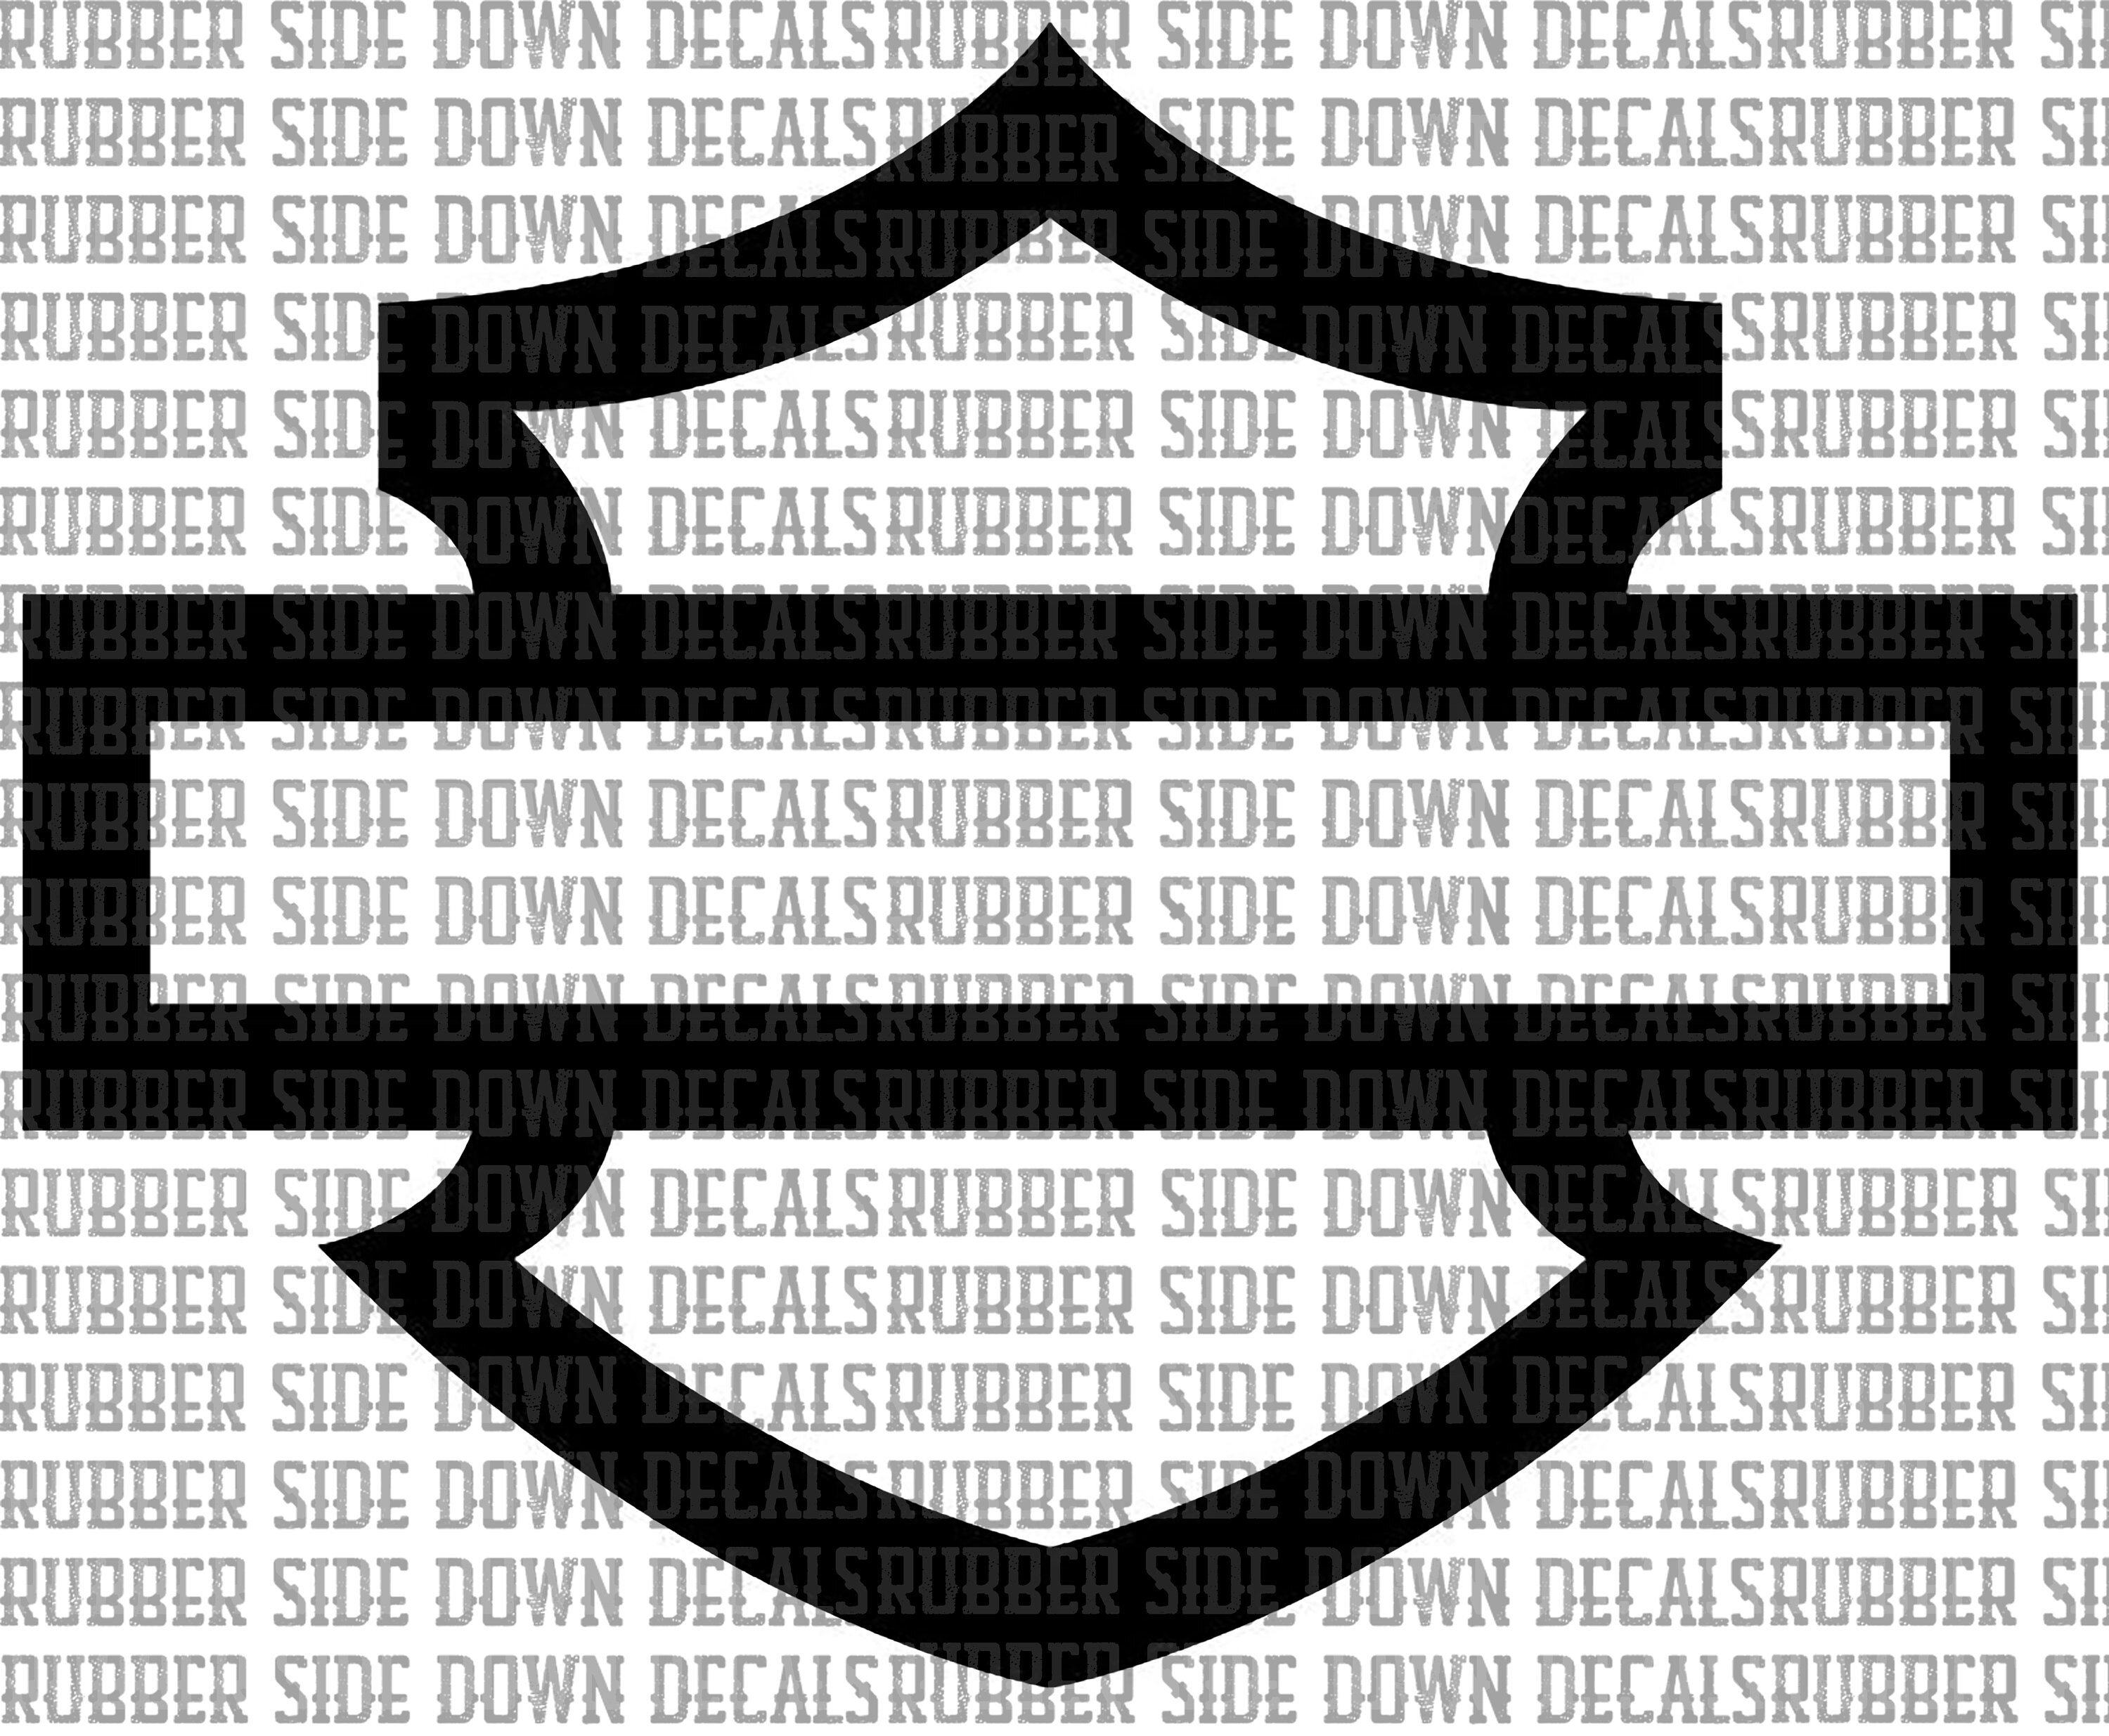 Bar and Shield Decal Premium Vinyl Decals for Motorcycles - Etsy